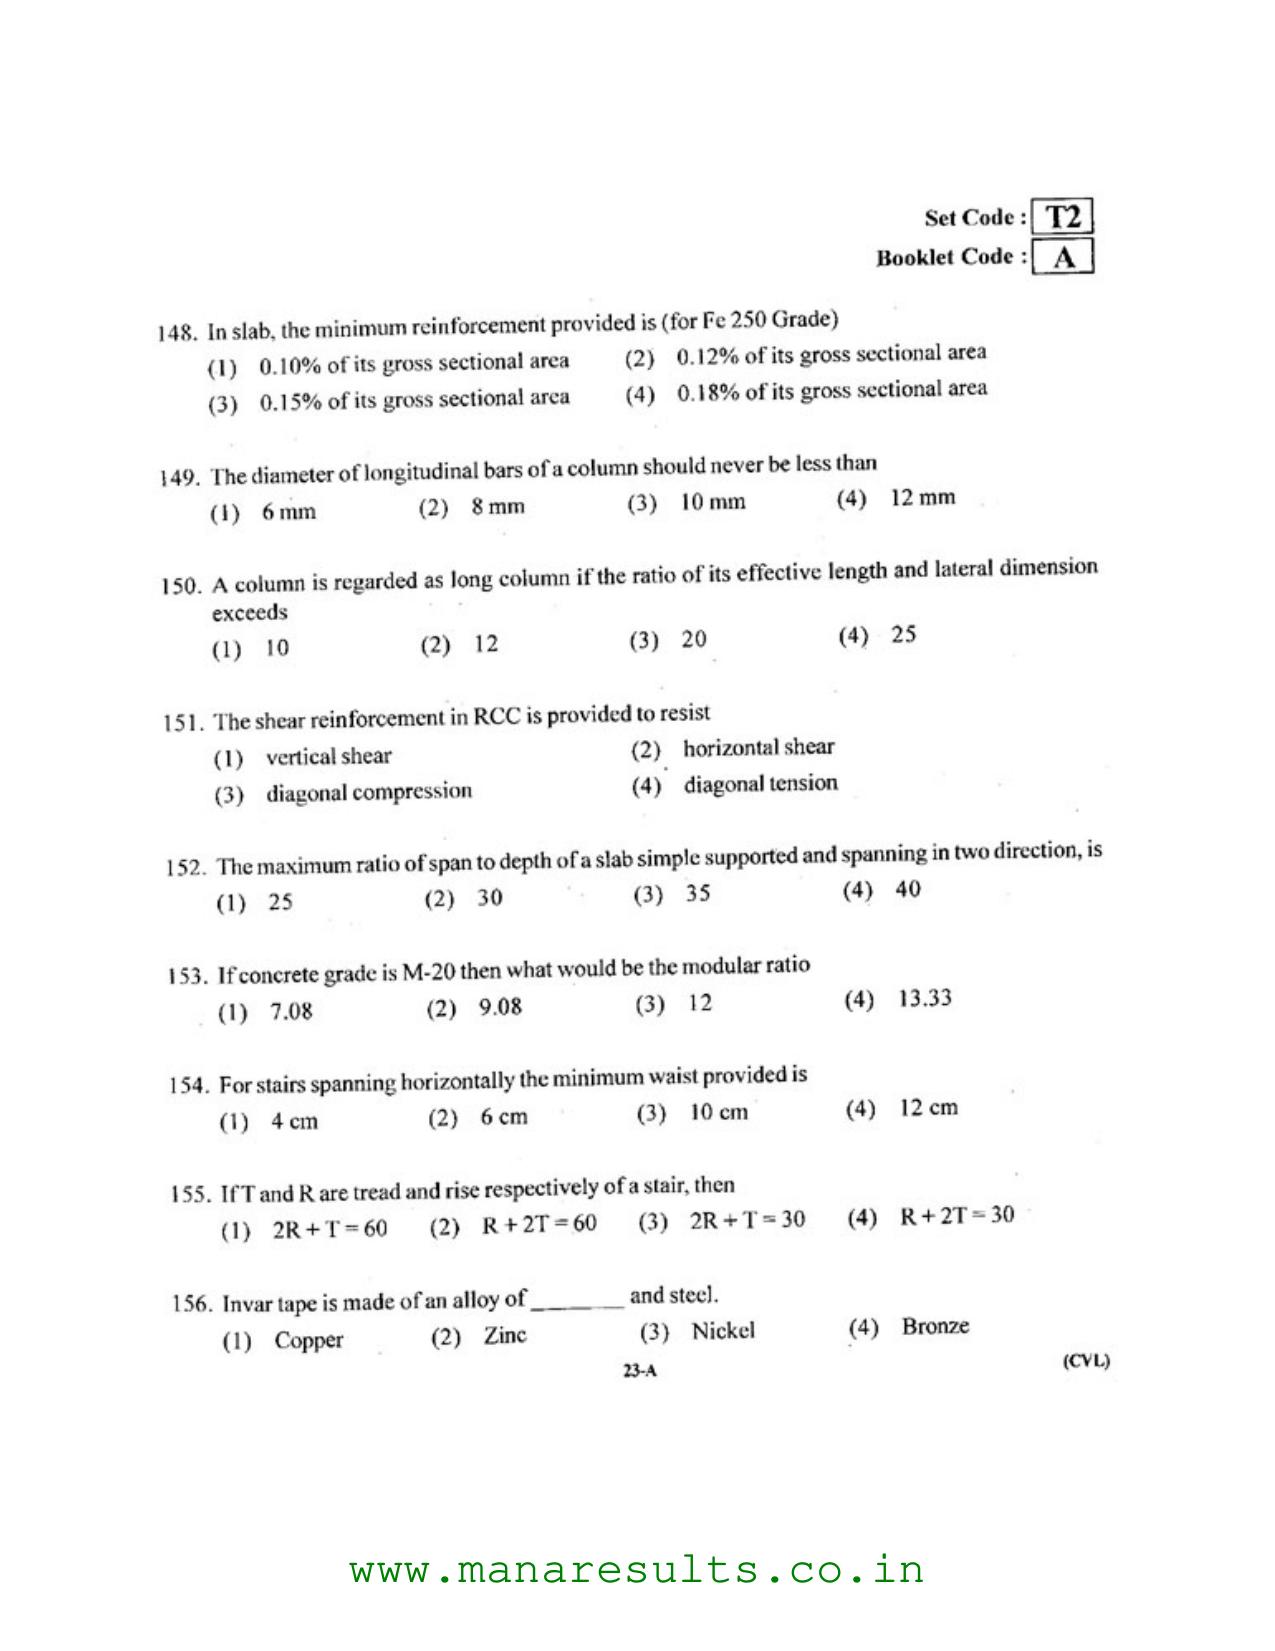 AP ECET 2016 Civil Engineering Old Previous Question Papers - Page 22